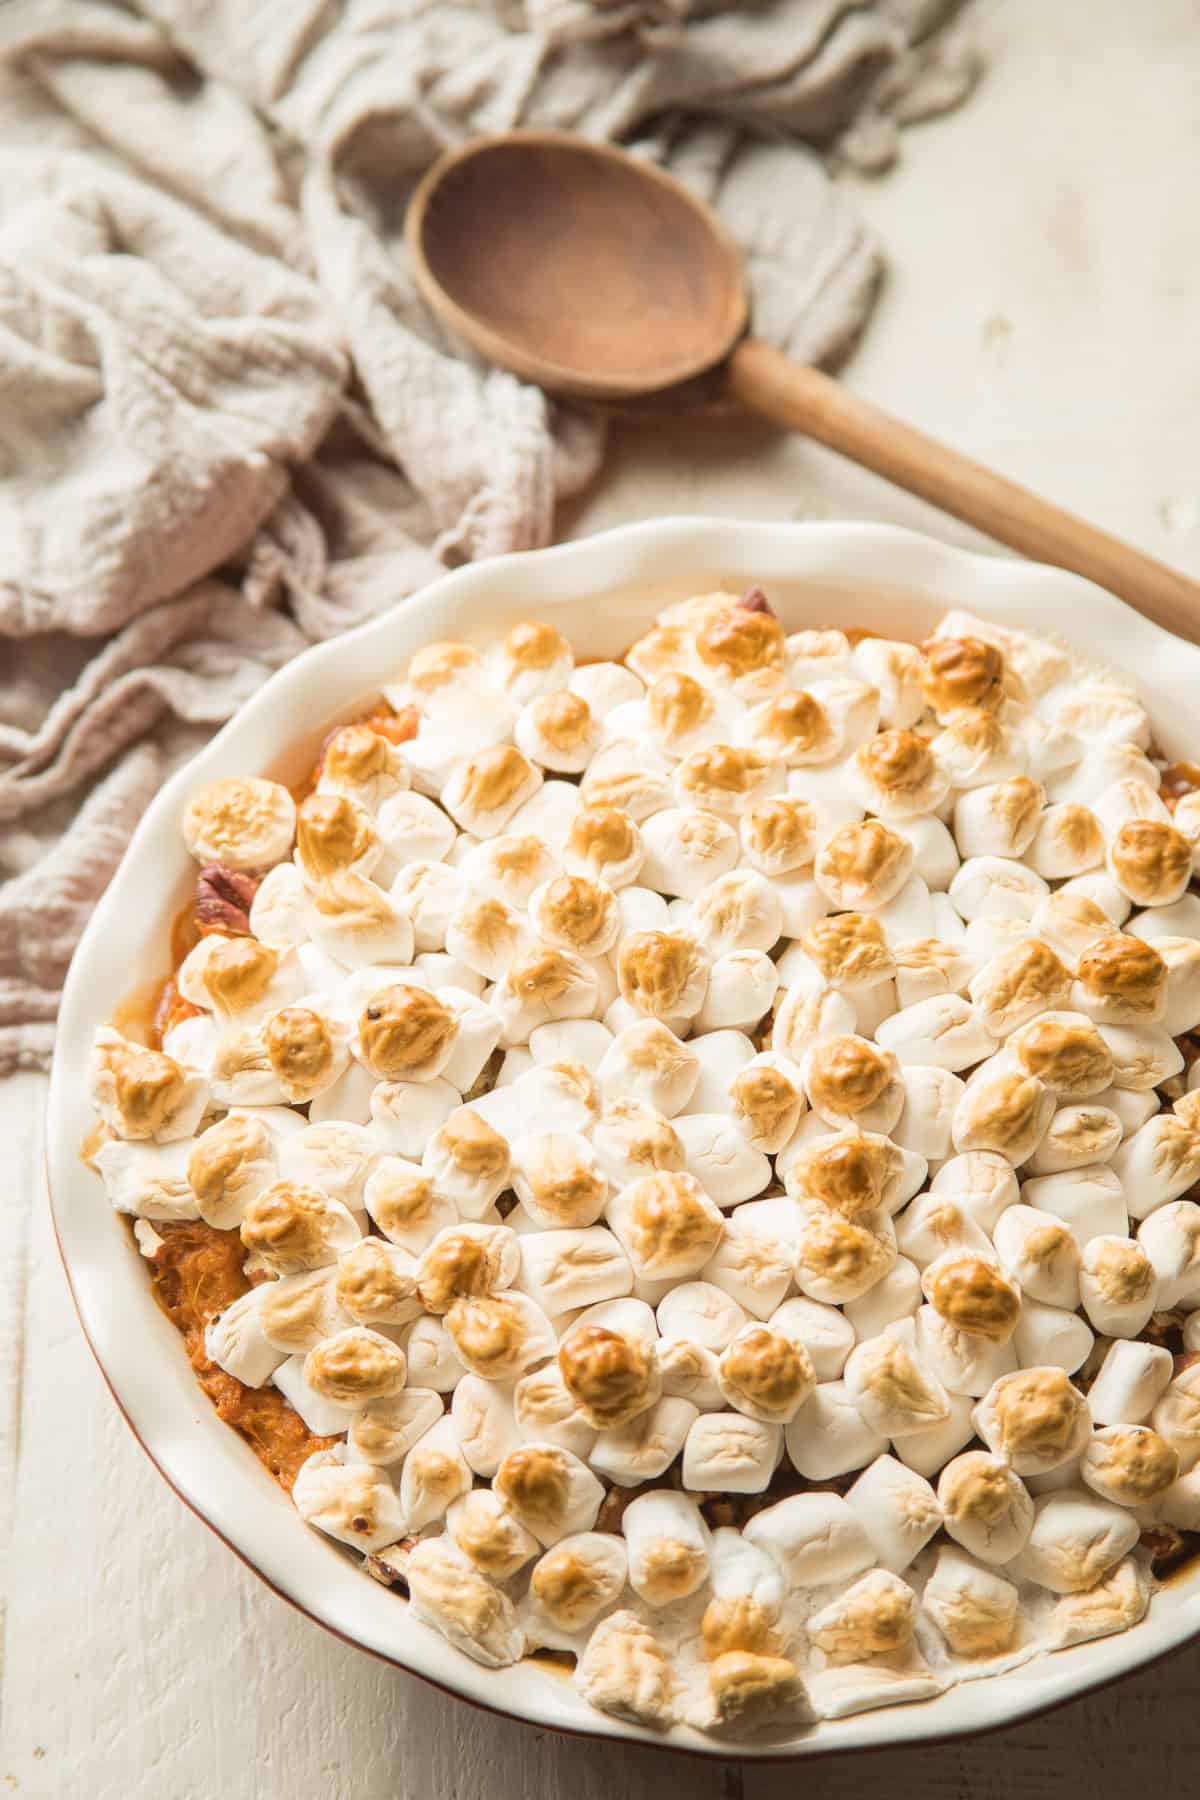 Dish of Marshmallow Vegan Sweet Potato Casserole with Spoon in the background.